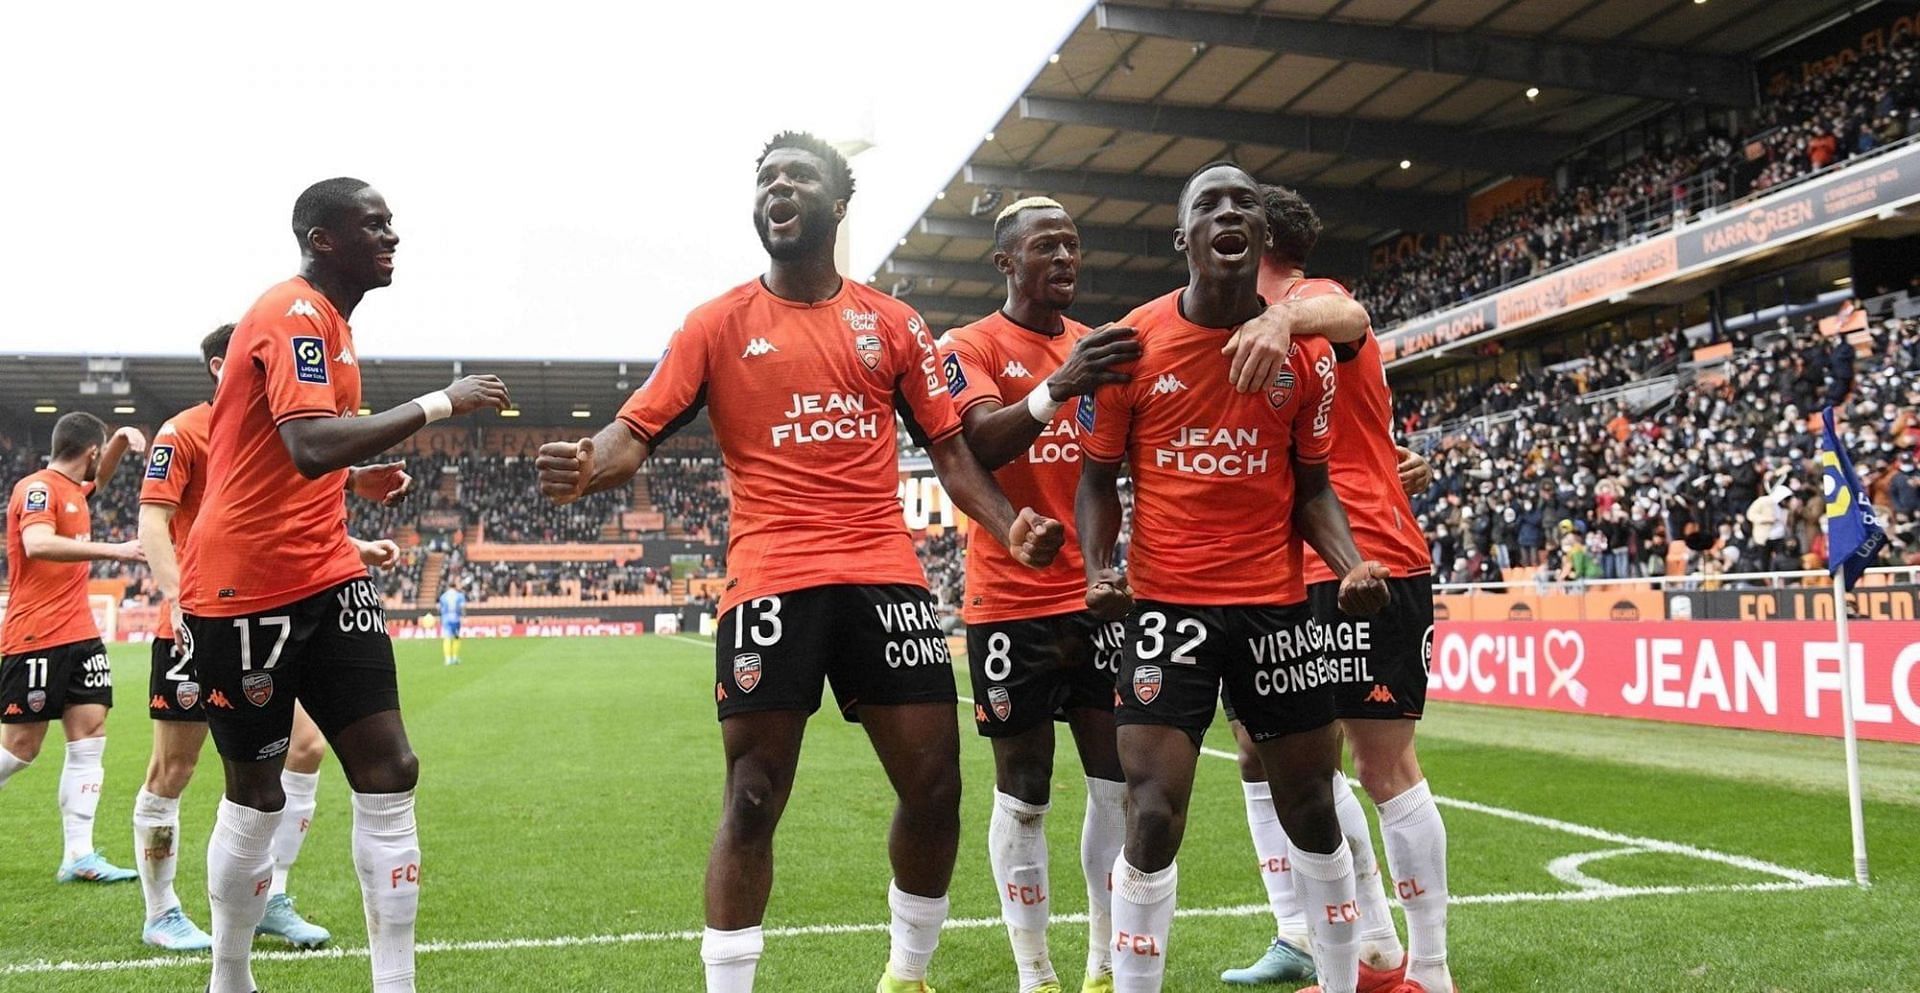 Lorient conclude their 2021-22 Ligue 1 campaign with a home game against Troyes